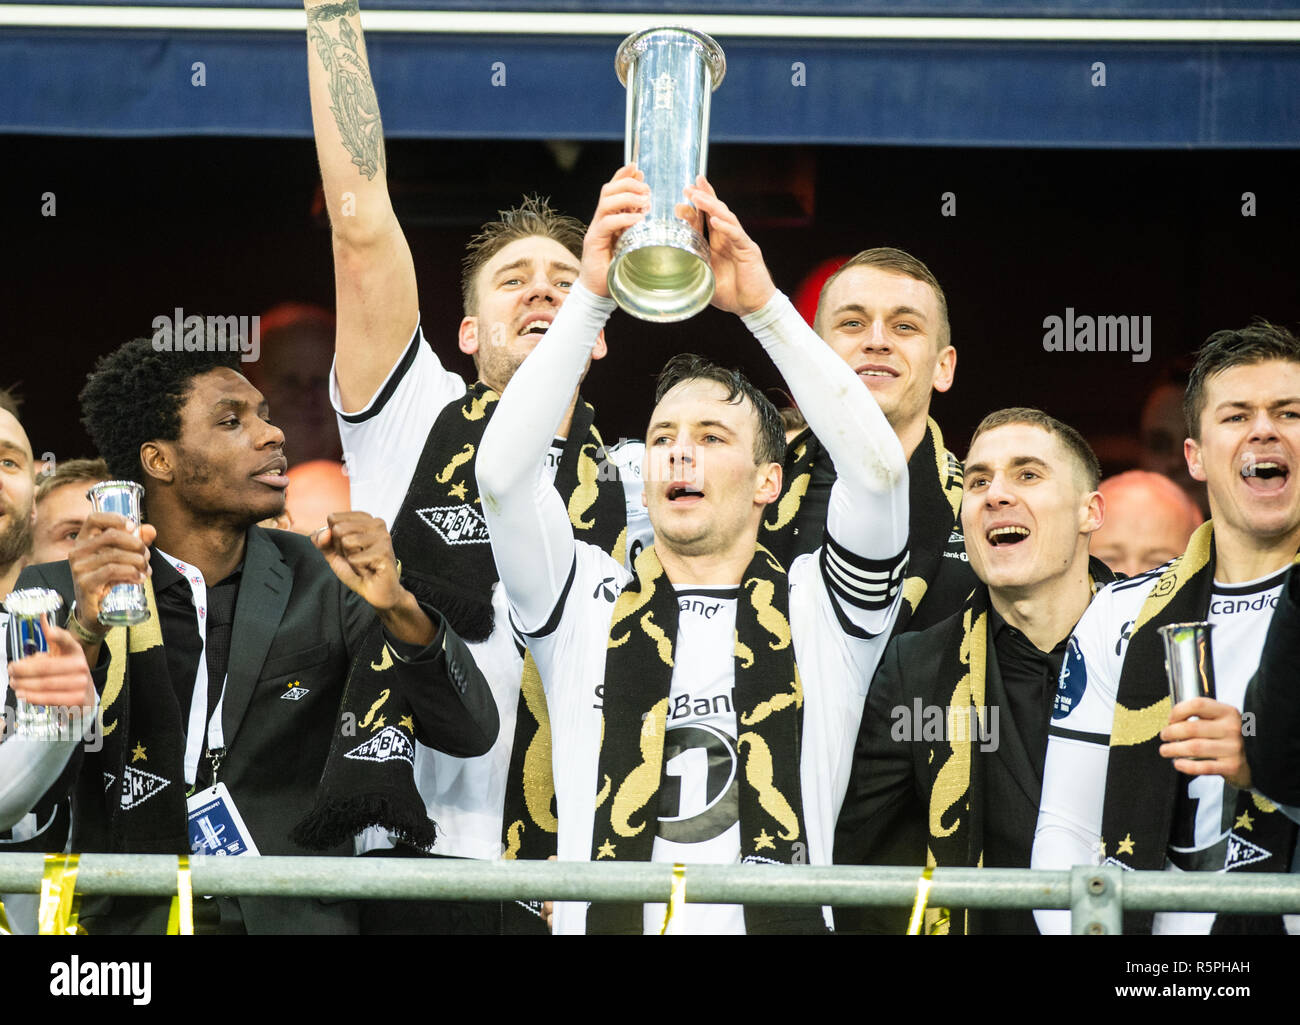 Norway, Oslo. 2nd Dec 2018. Captain Mike Jensen can raise the trophy after Rosenborg wins the 2018 Norwegian Cup Final 4-1 against Strømsgodset at Ullevaal Stadion in Oslo. (Photo credit: Gonzales Photo - Jan-Erik Eriksen). Credit: Gonzales Photo/Alamy Live News Stock Photo